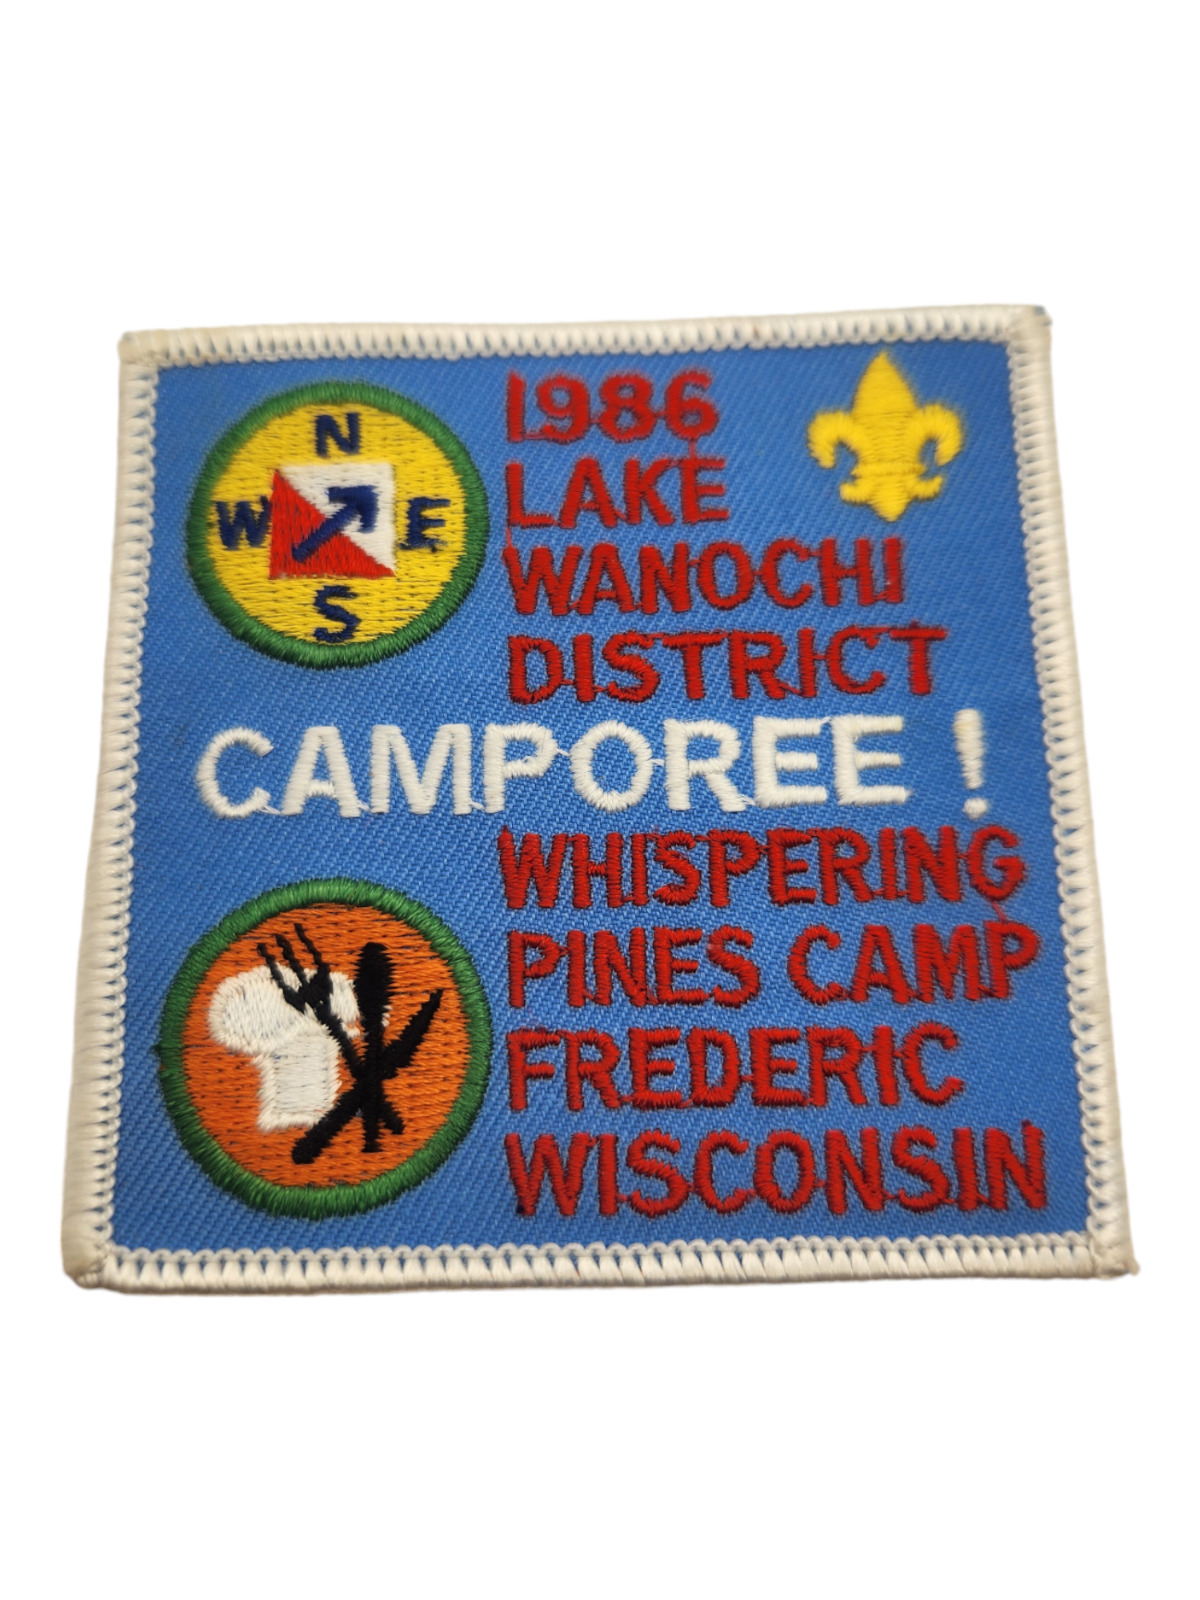 1986 Lake Wanochi Camporee Whispering Pines Camp Frederic WI Boy Scout BSA Patch